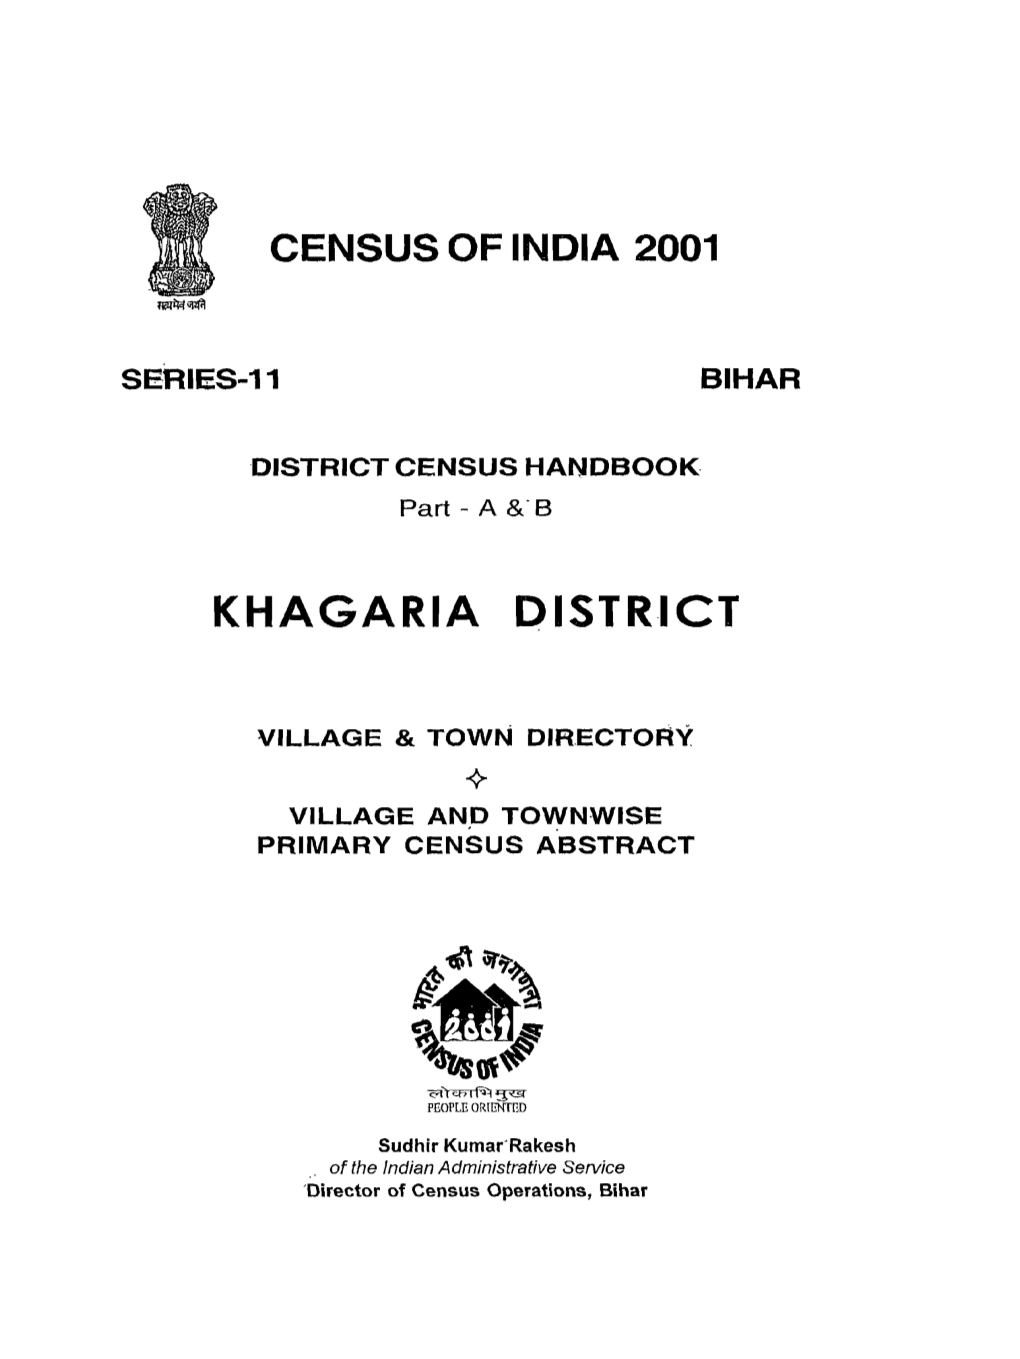 Village and Townwise Primary Census Abstract, Khagaria District